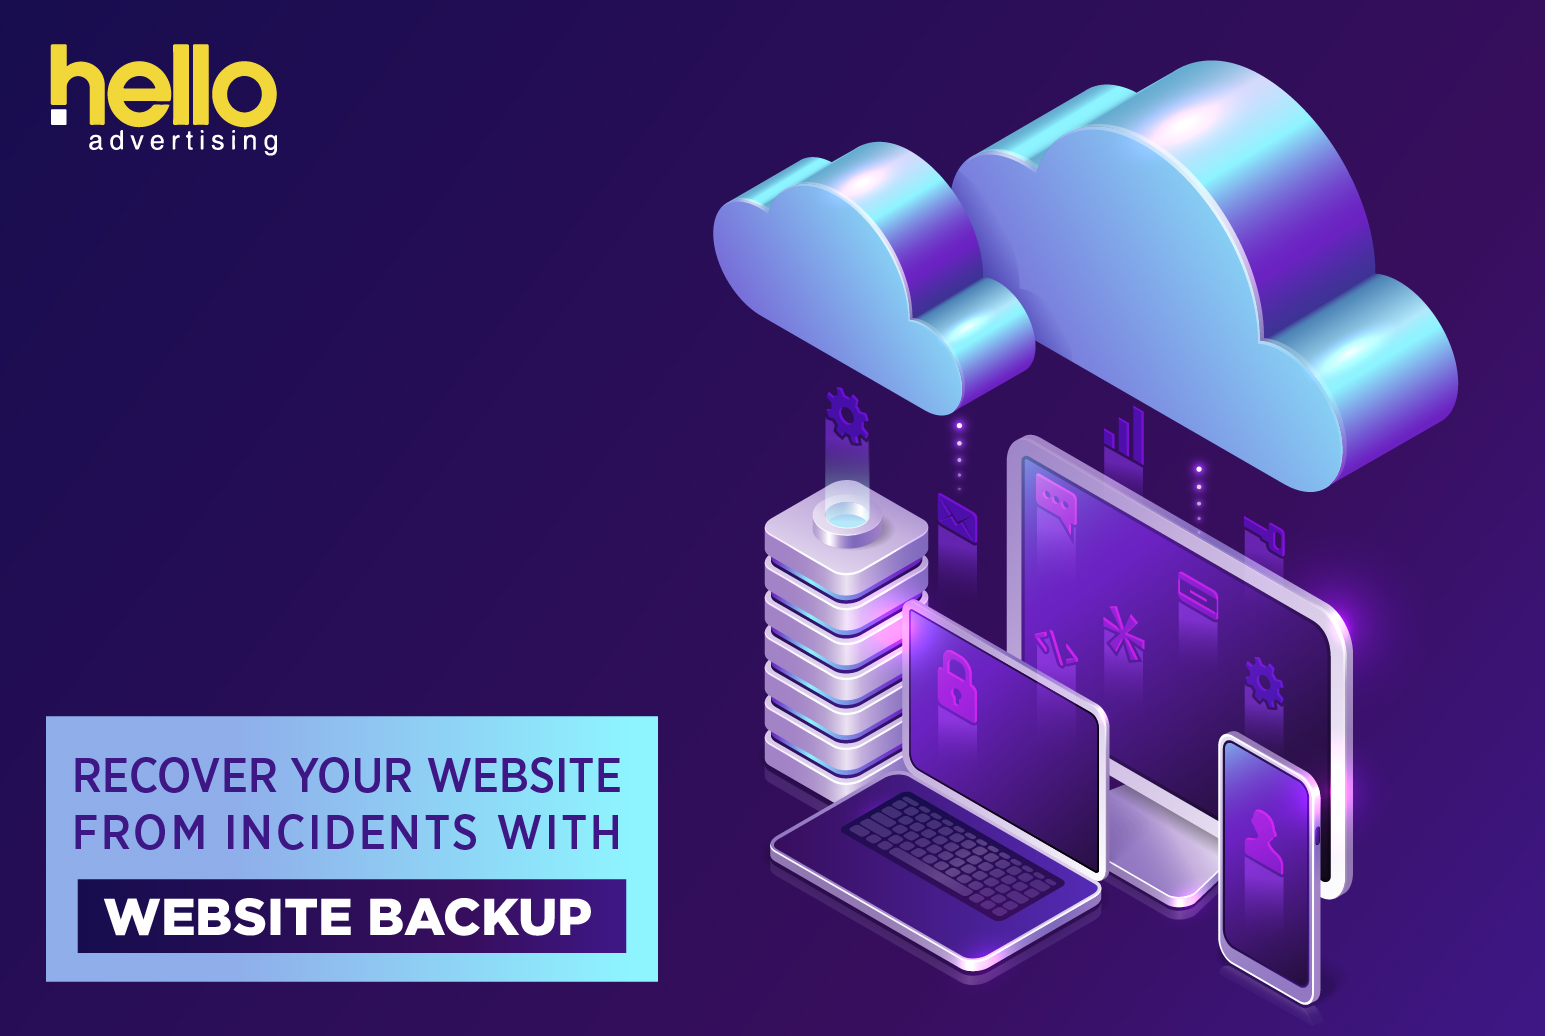 What is Website Backup?